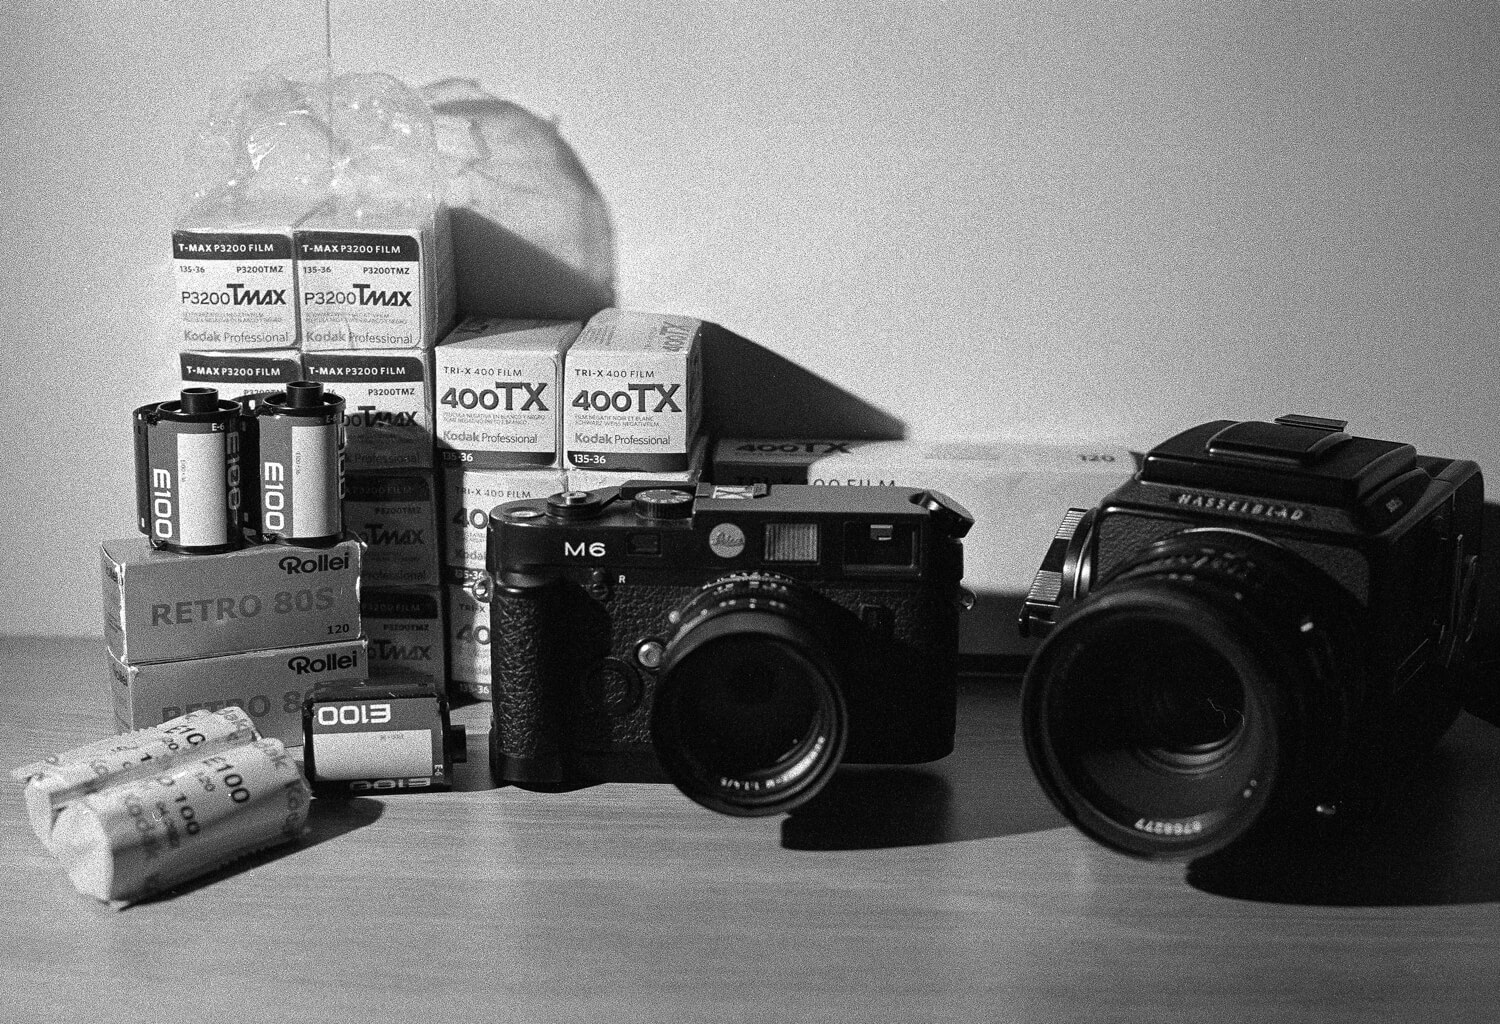 My gear choices: Leica M6 with its Summilux-M 50mm f/1.4 ASPH and my Hasselblad 500CXi with its Carl Zeiss 80mm f/2.8 Planar